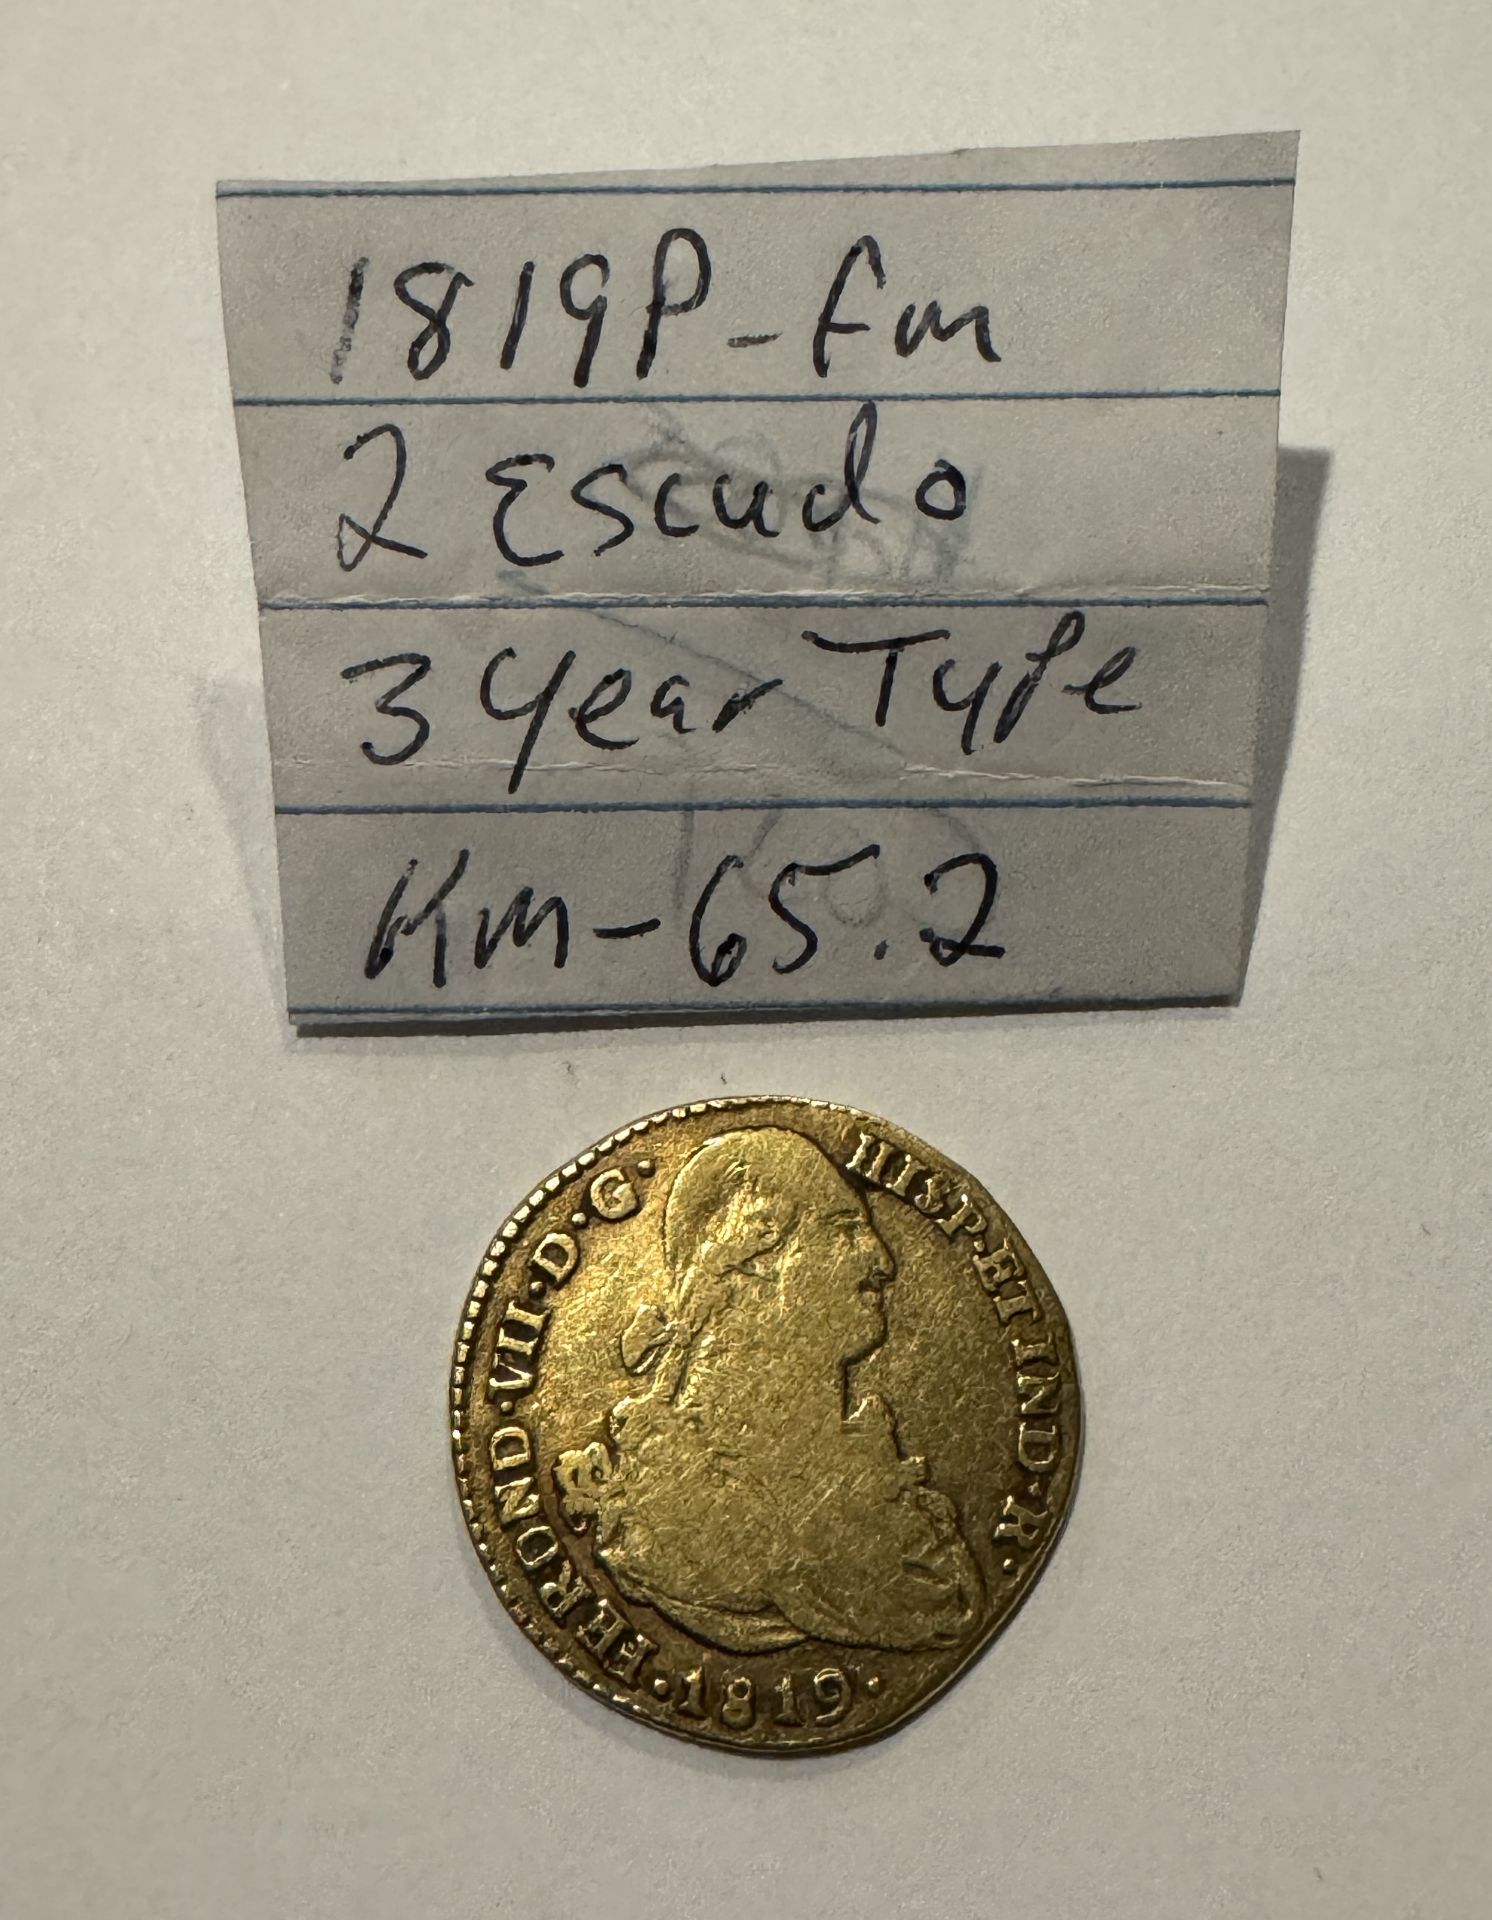 1819P-FM 2 ESCUDO 3 YEAR TYPE GOLD COIN KM-65.2 - Image 2 of 2